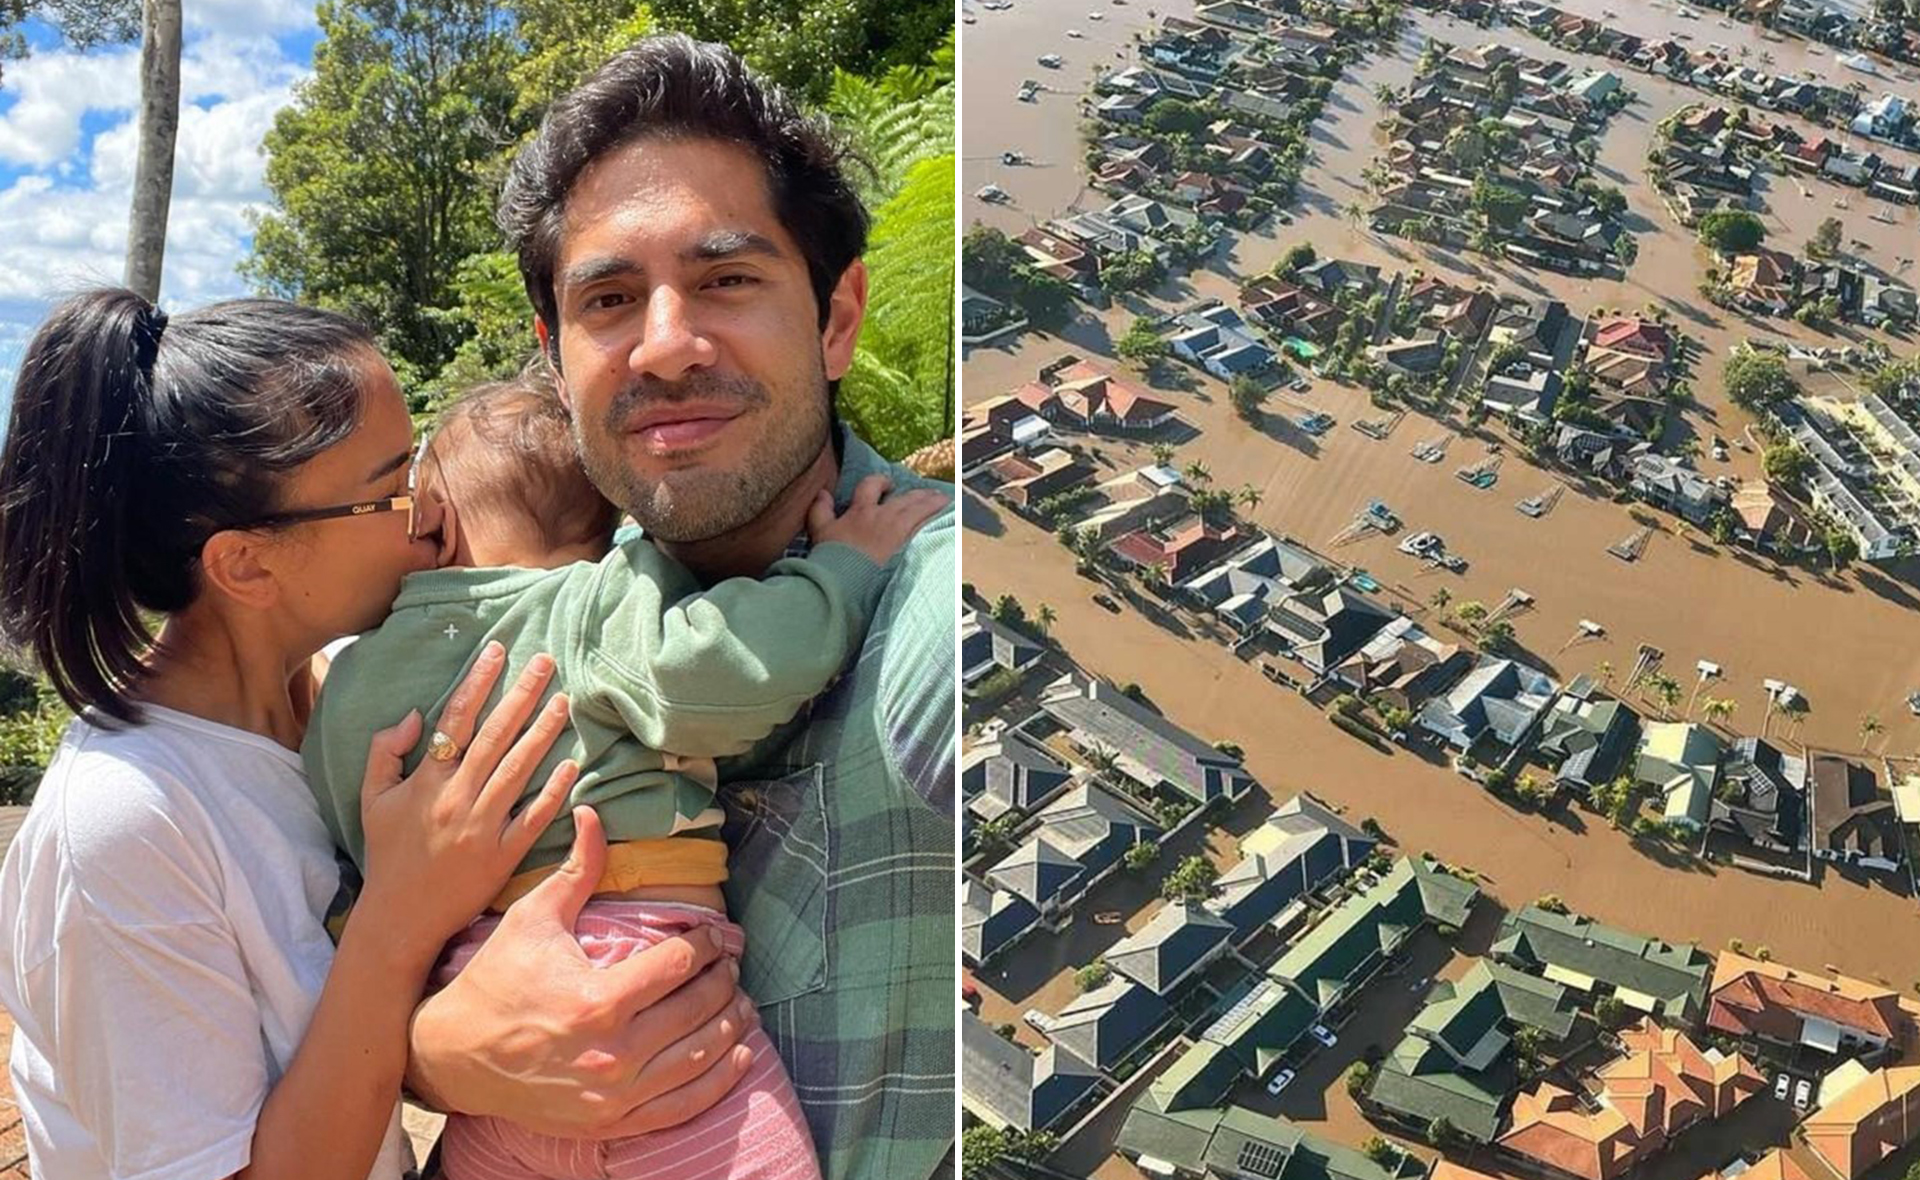 Former Home and Away star Tai Hara is left heartbroken after floods destroy his family home